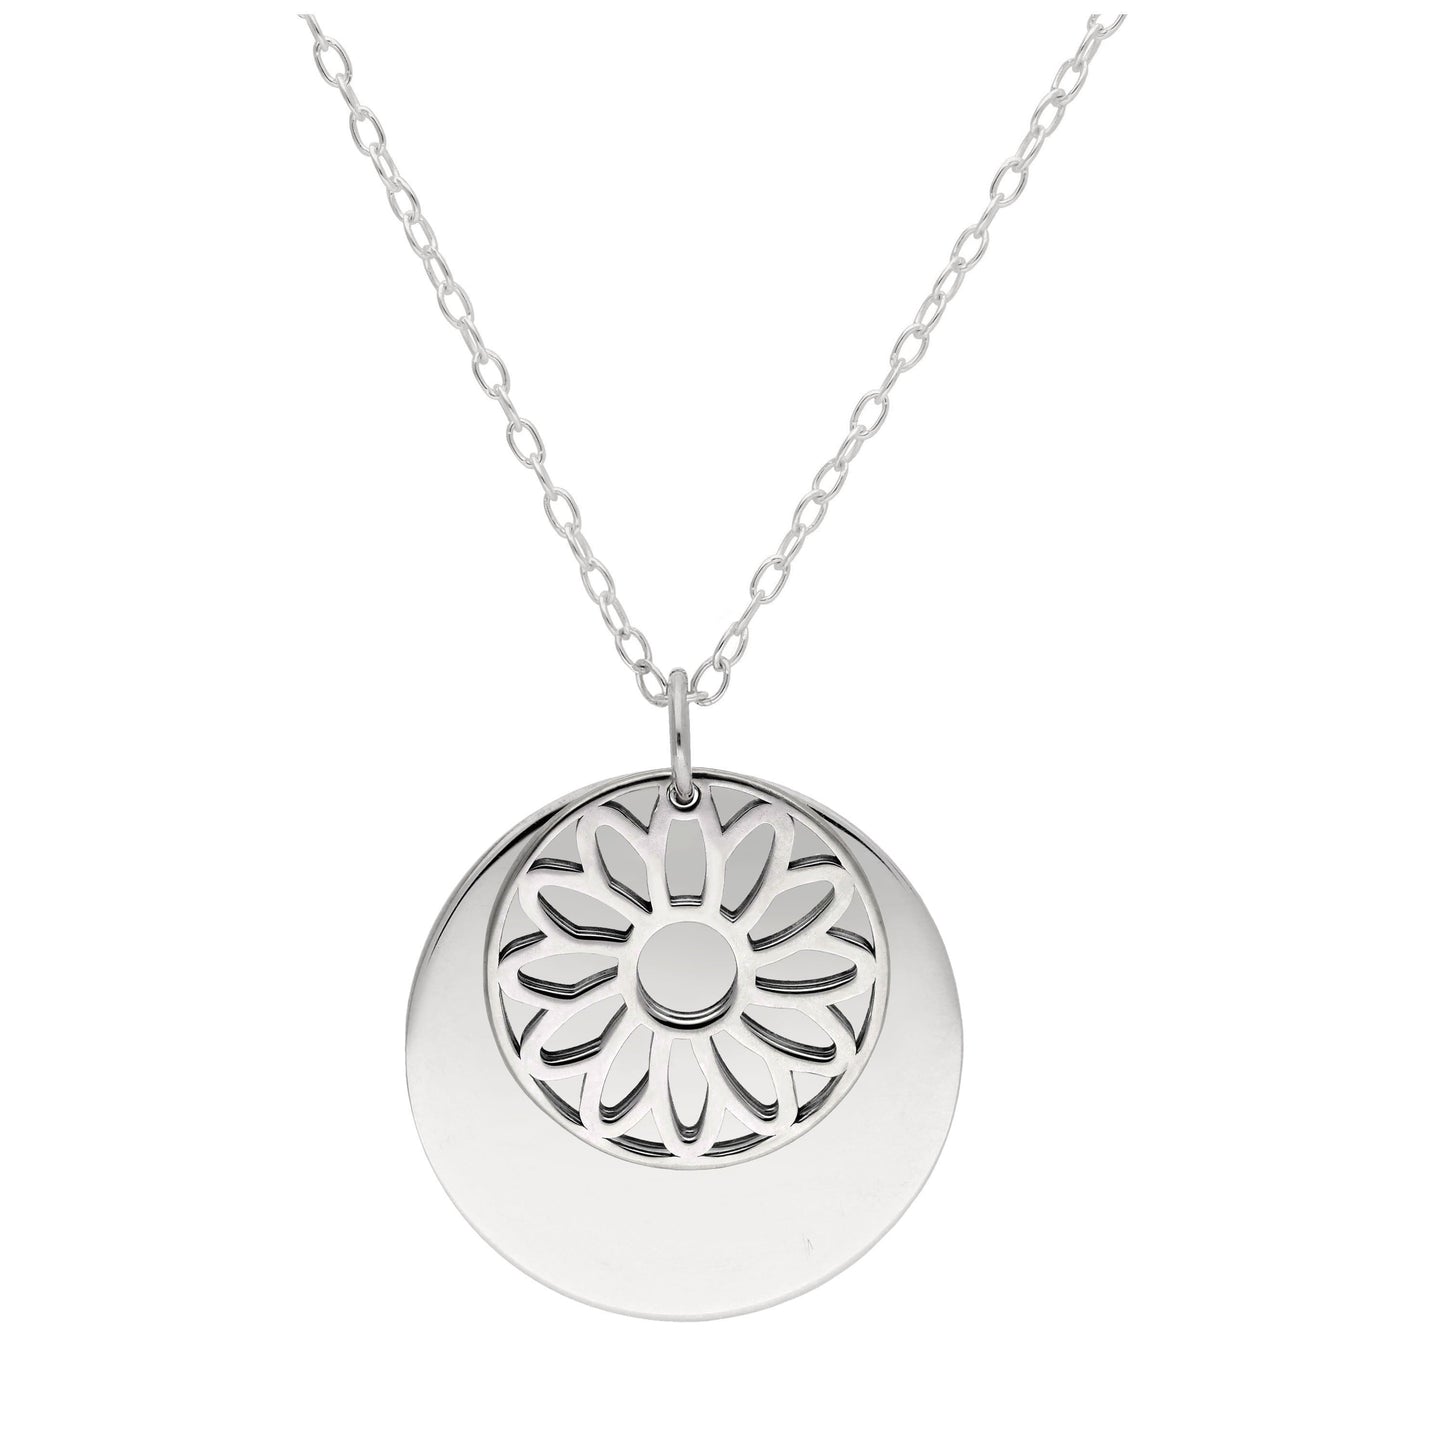 Sterling Silver April Daisy Birth Flower & 18mm Engravable Tag Necklace 14 - 22 Inches